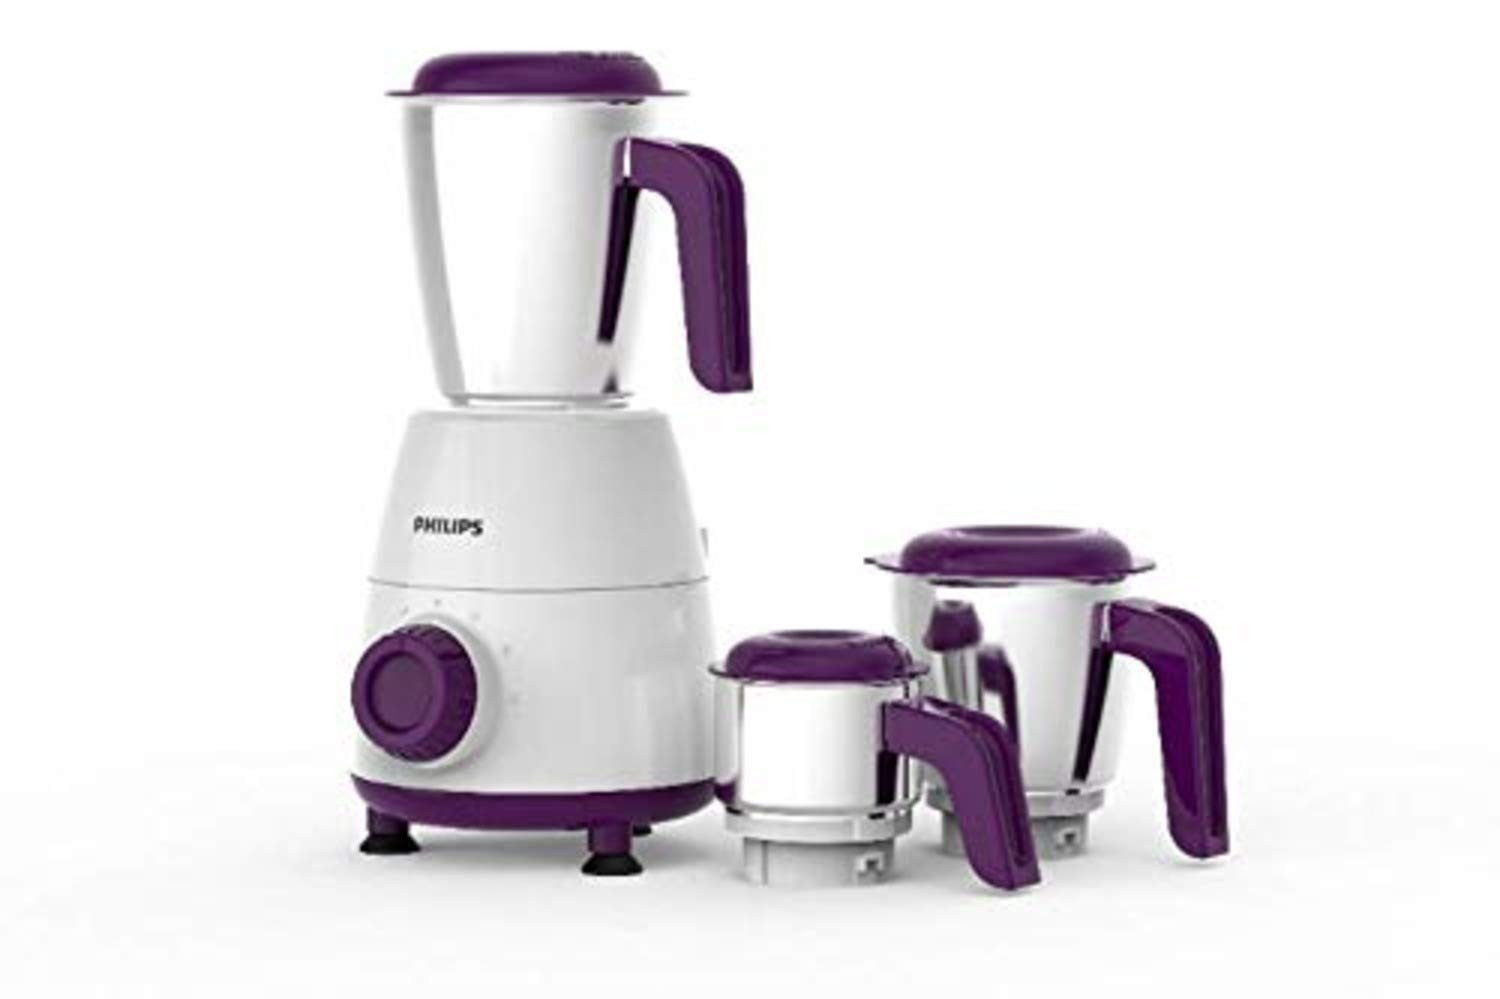 Philips HL7505 Mixer Grinder - White and Purple